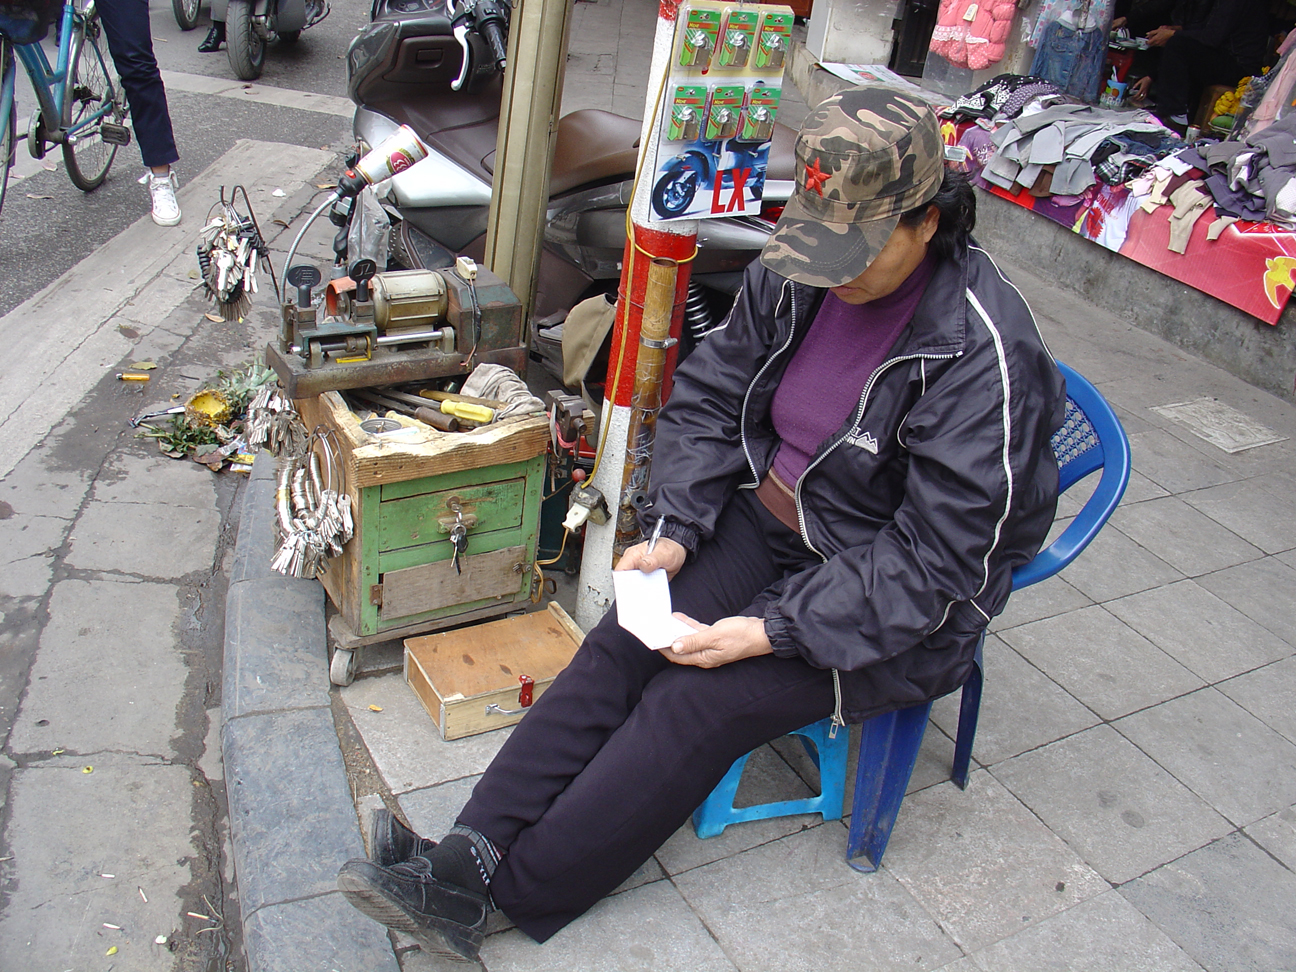 A street vendor resting after lunch time